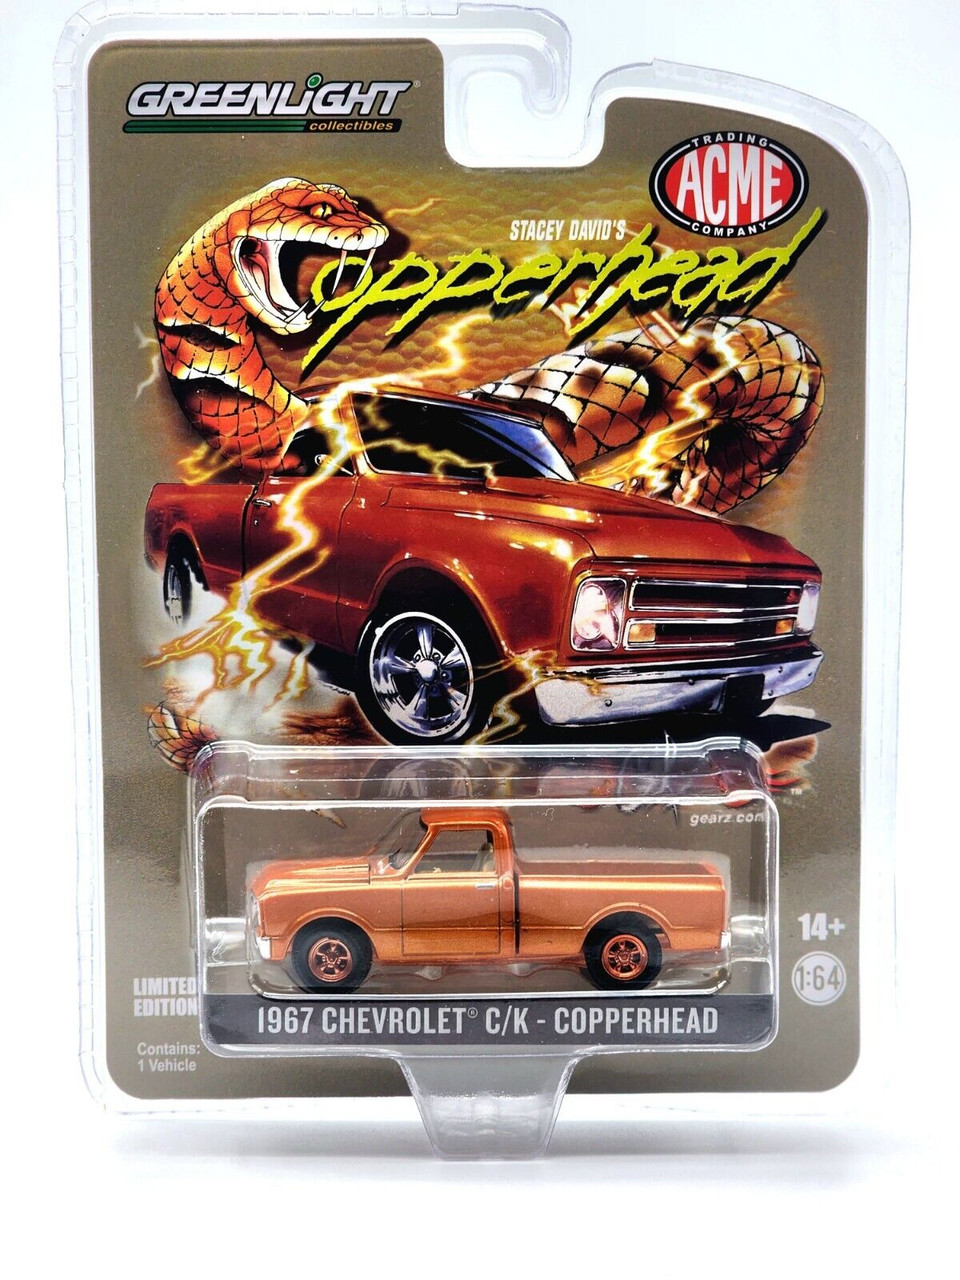 CHASE CAR 1/64 1967 Chevrolet C/K Pickup Truck Copper Orange Metallic "Stacey David's Copperhead" Diecast Car Model by Greenlight for ACME